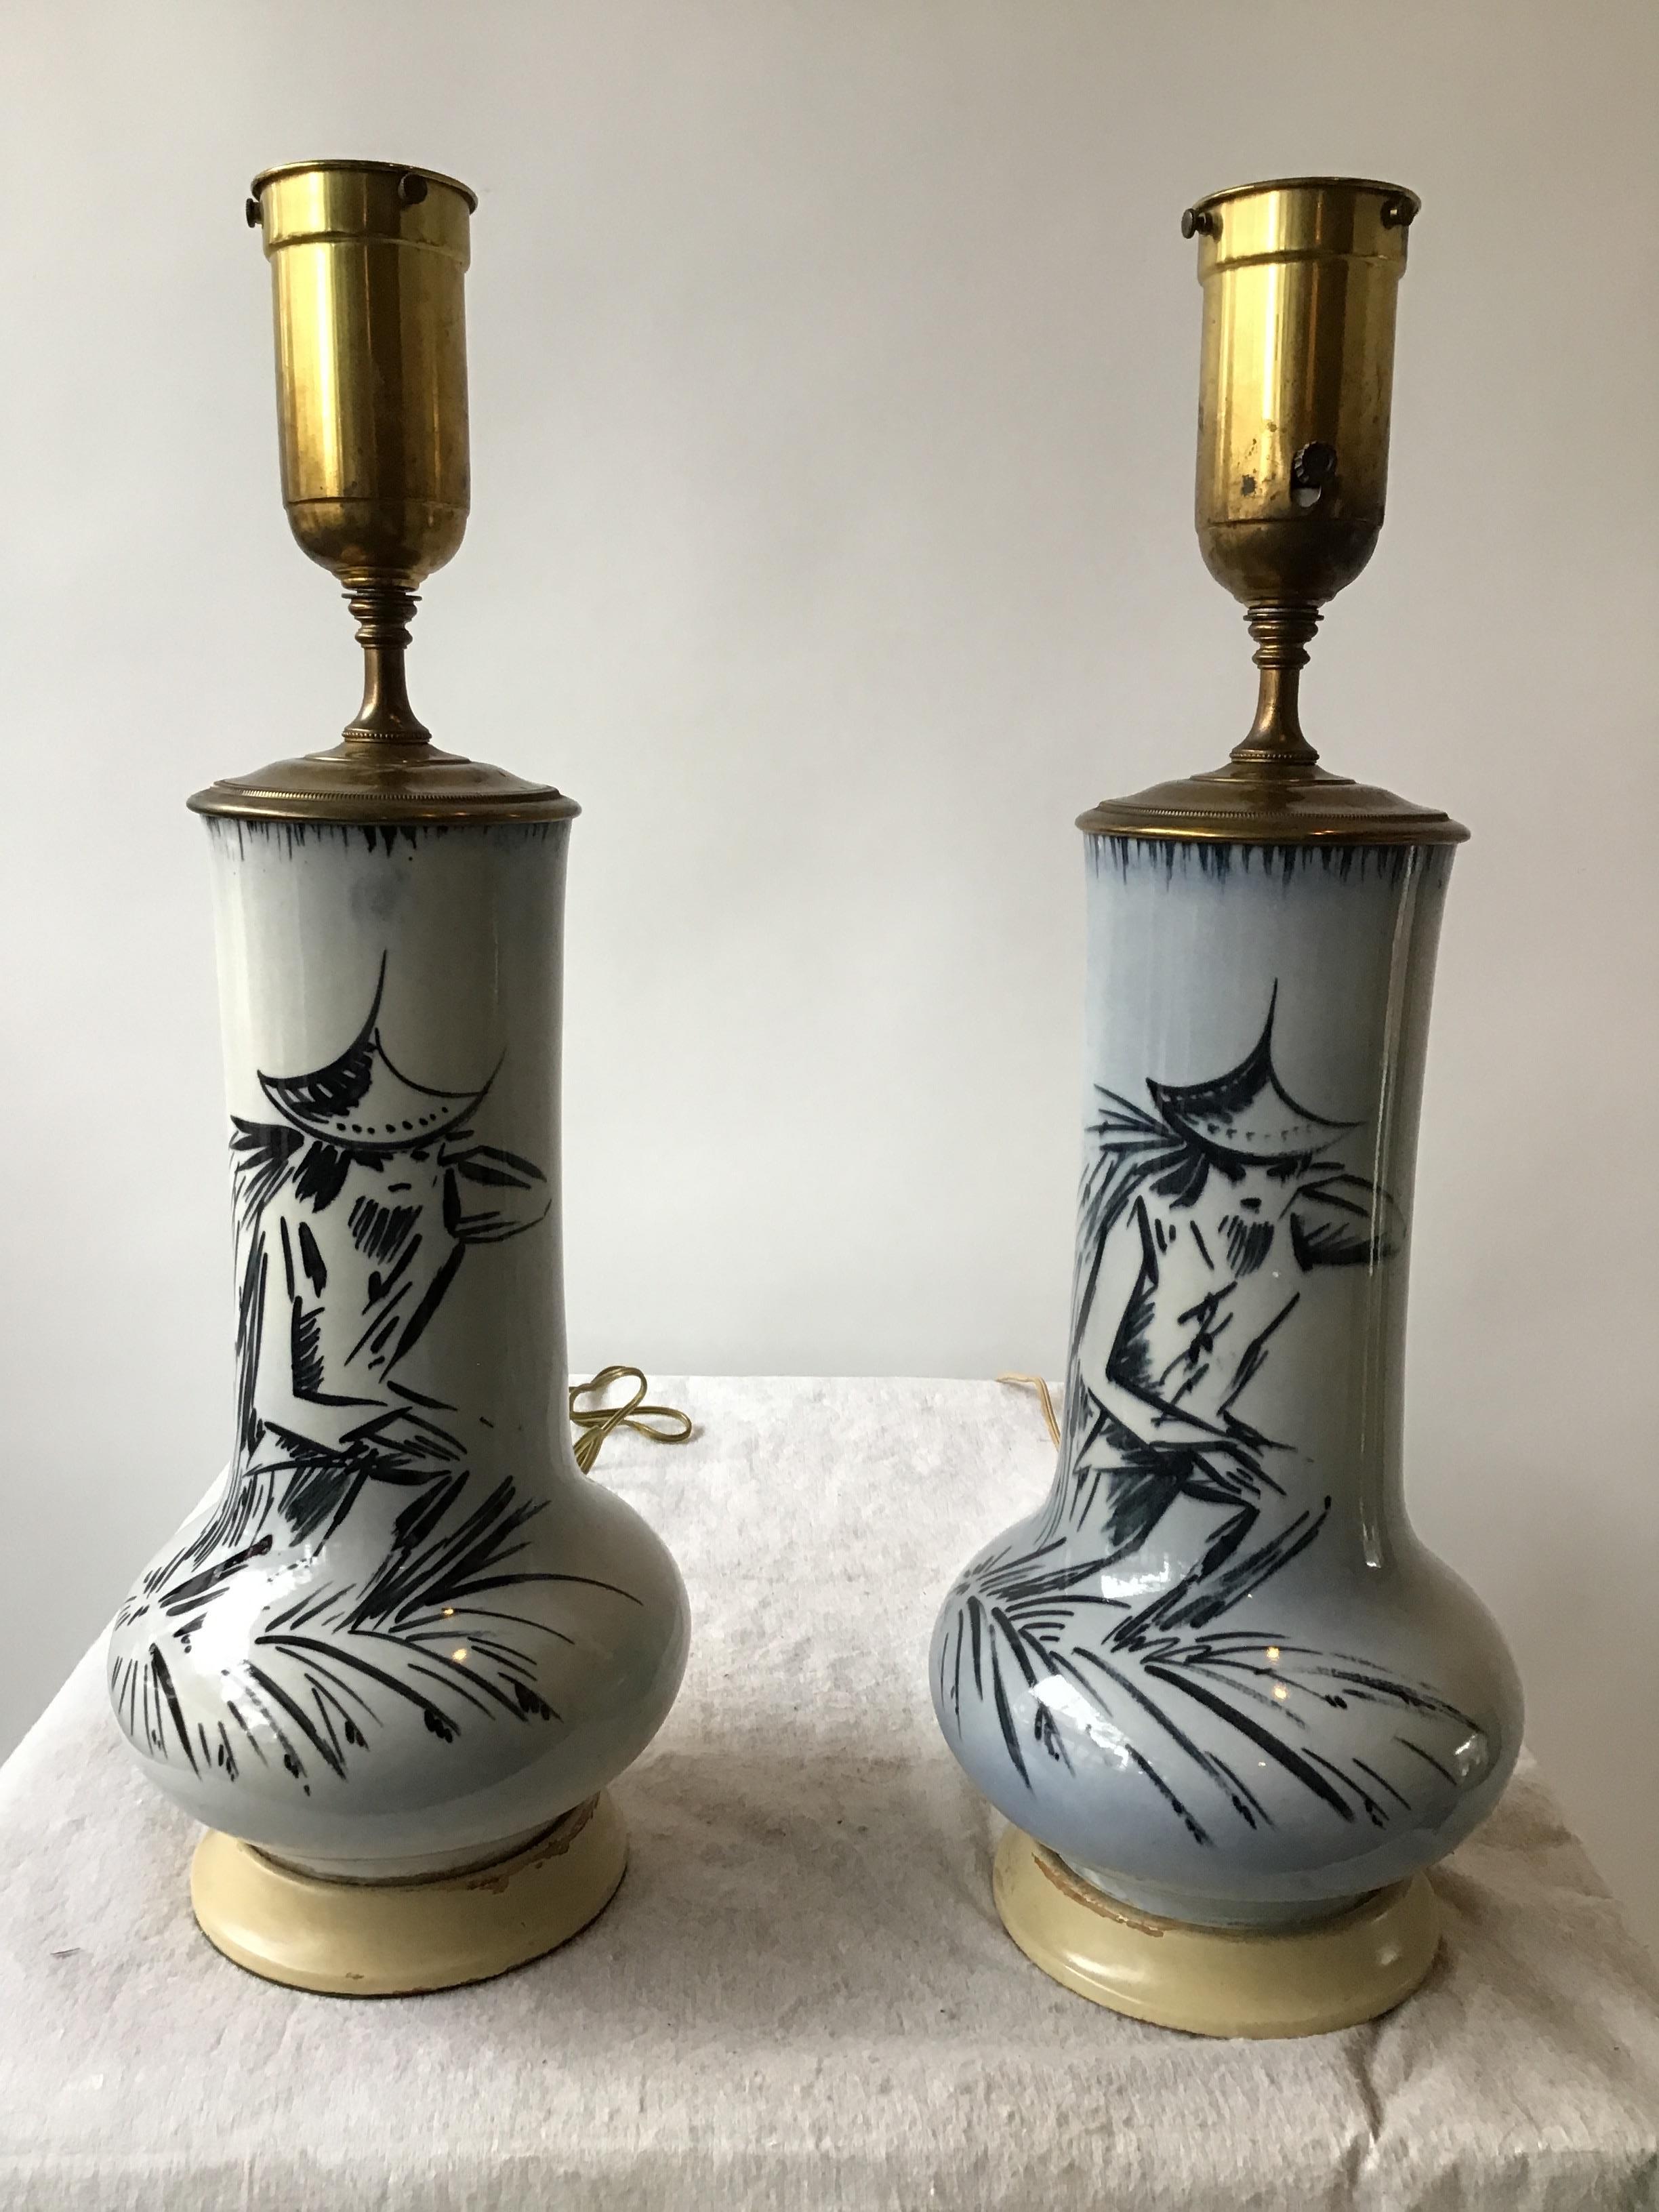 Pair of 1950s blue ceramic Asian figural lamps on wood base.